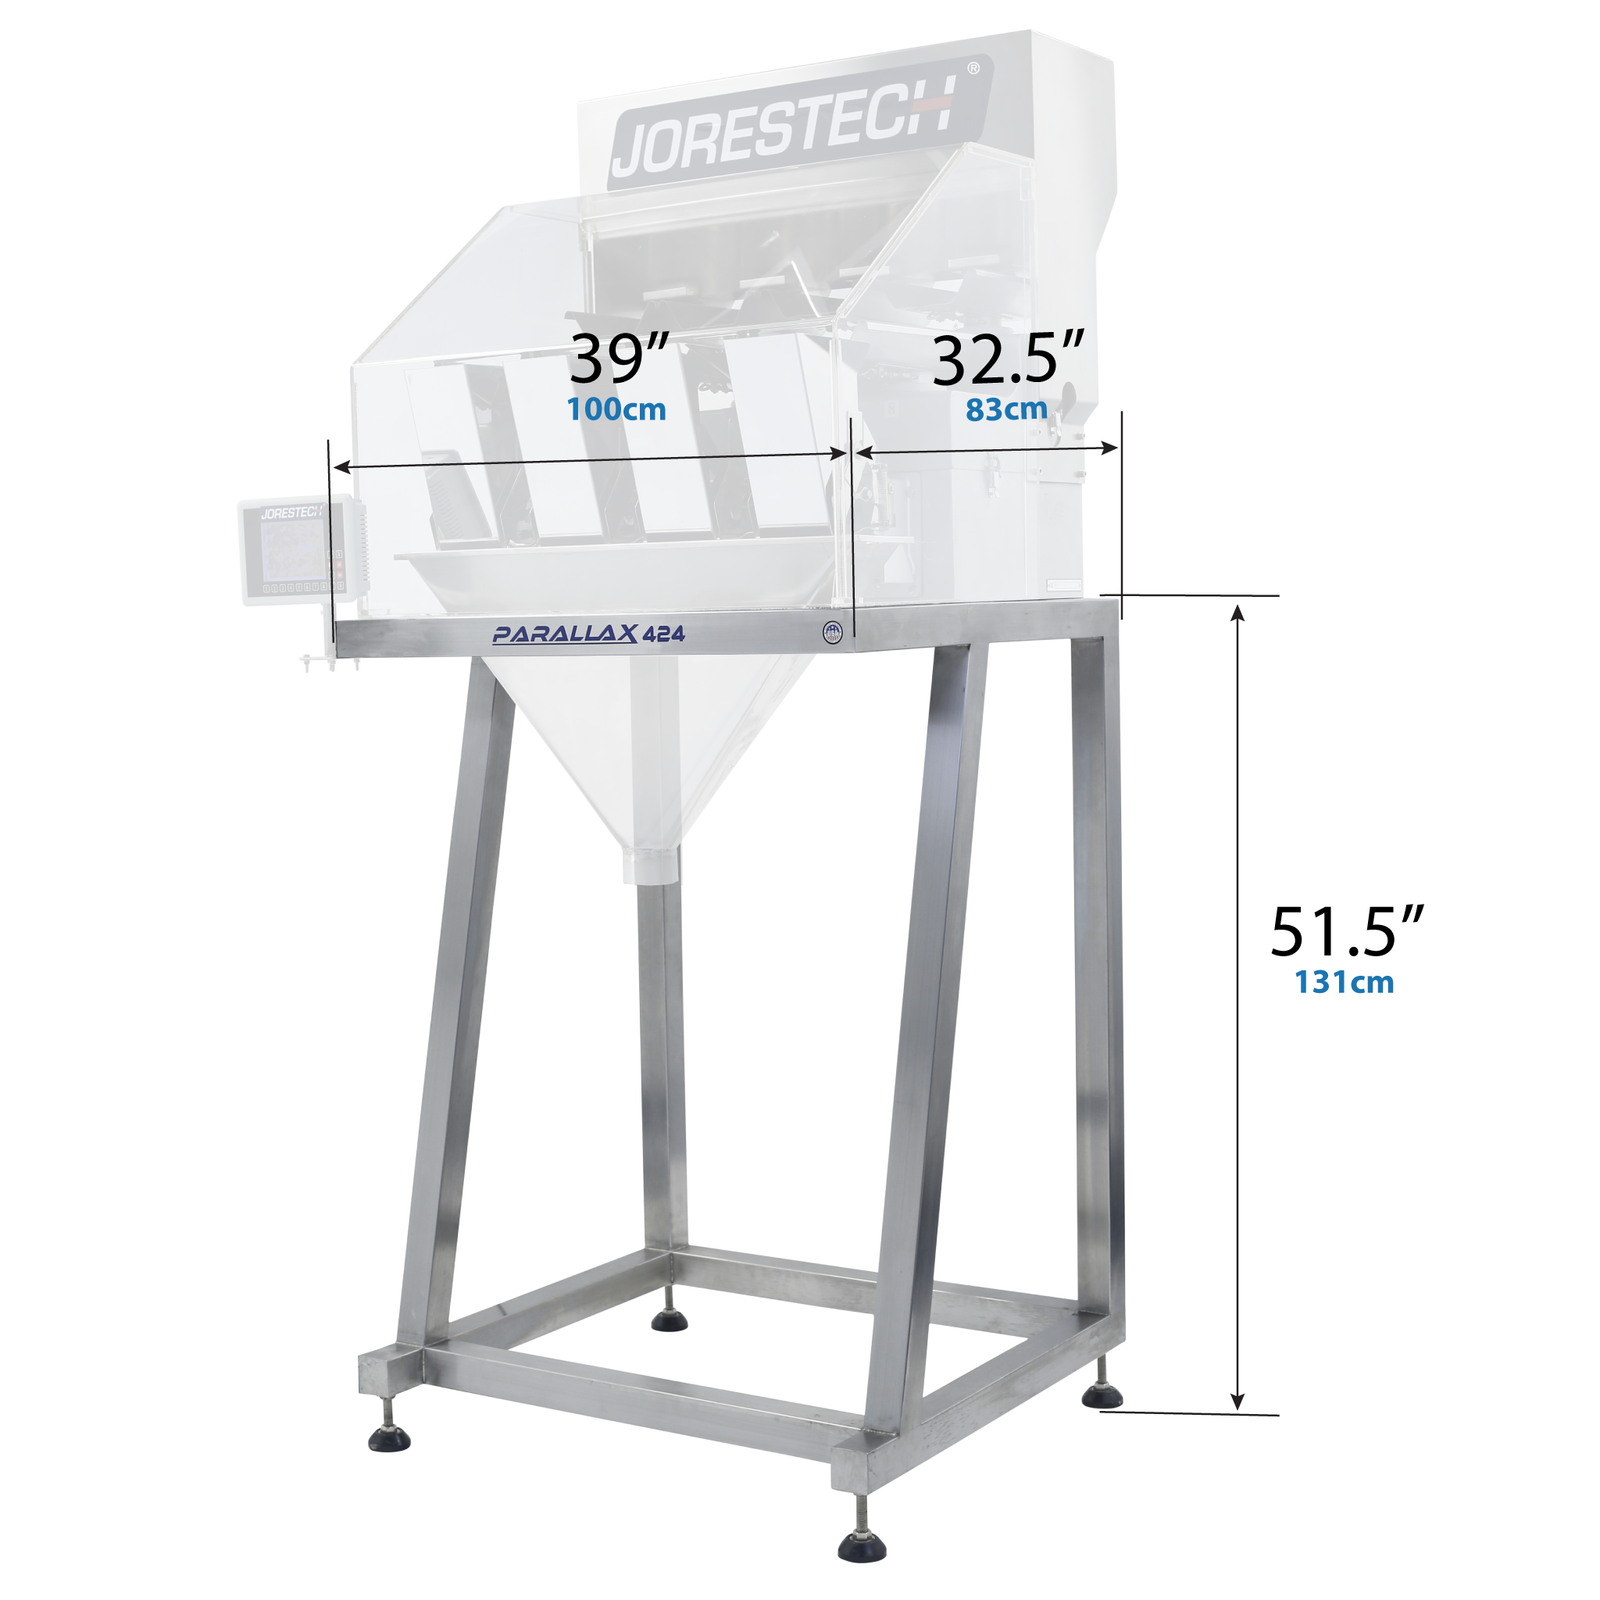 Stainless steel stand built for the JORES TECHNOLOGIES® 4 head linear weigher shown with its measurements: 51.5 x 32.5 x 39 inches